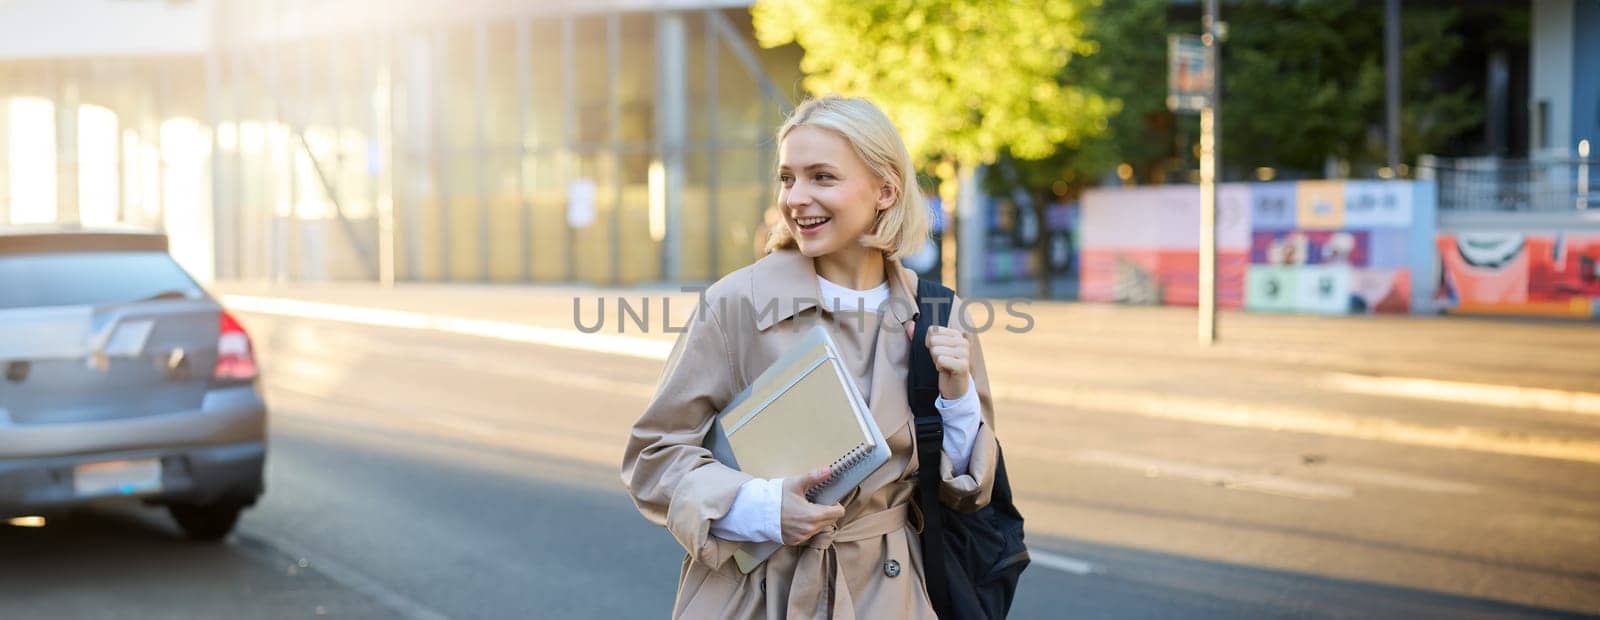 Lifestyle portrait of young woman walking on street with backpack and notebook, looking aside, saying hello to someone on her way to university or college by Benzoix